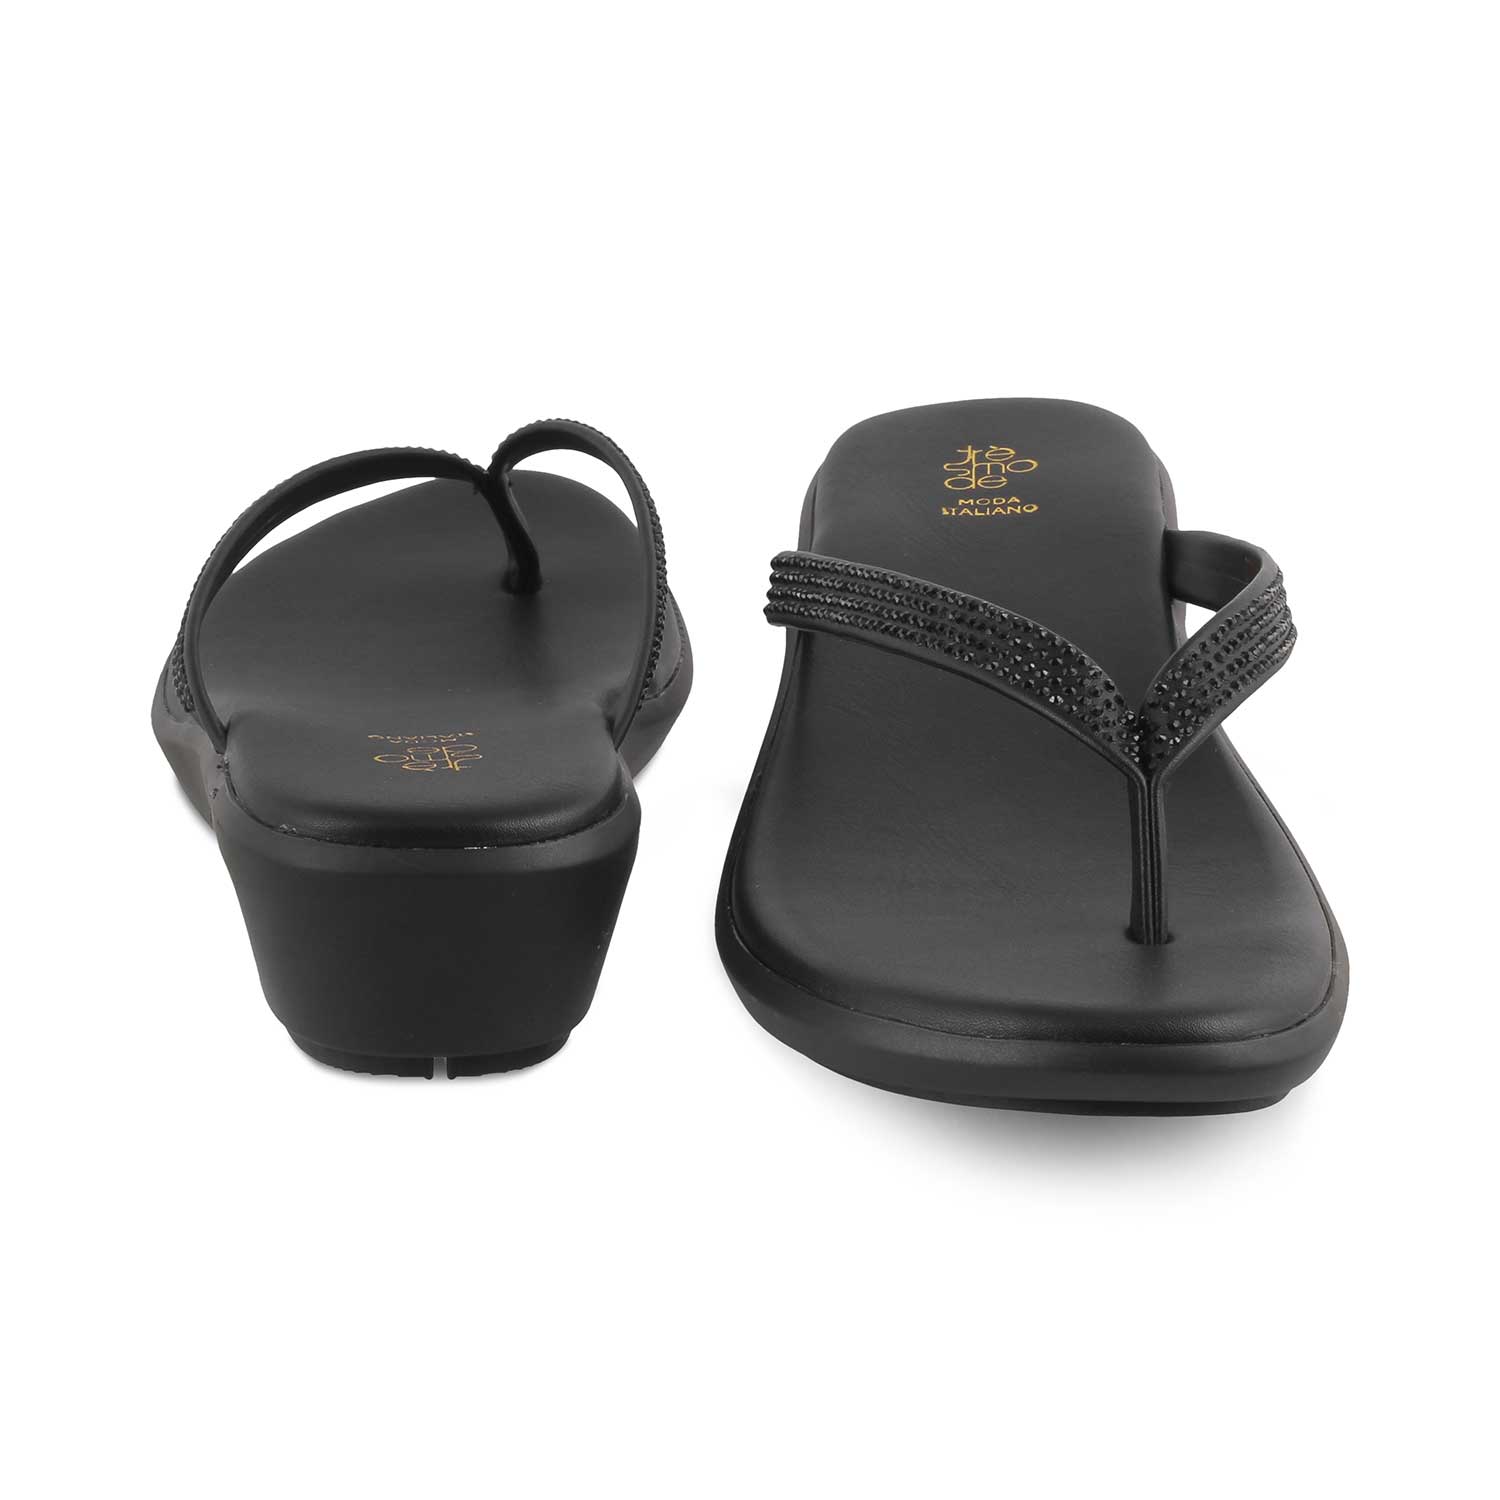 The Victoria Black Women's Casual Wedge Sandals Tresmode - Tresmode